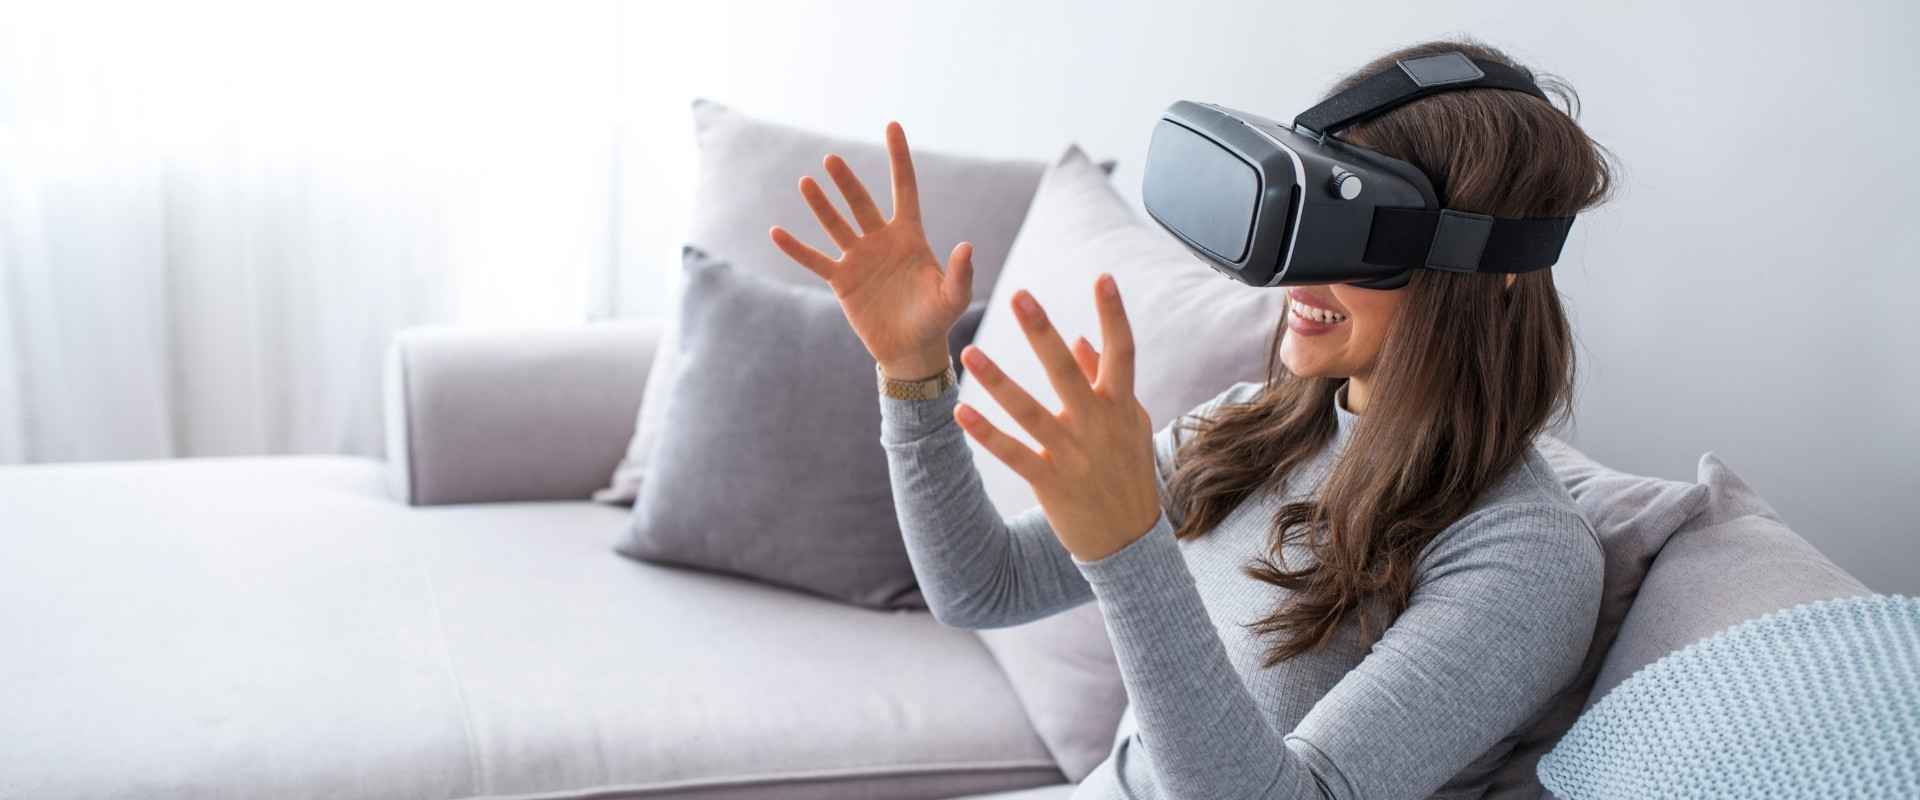 The Effects of Augmented and Virtual Reality on Consumers